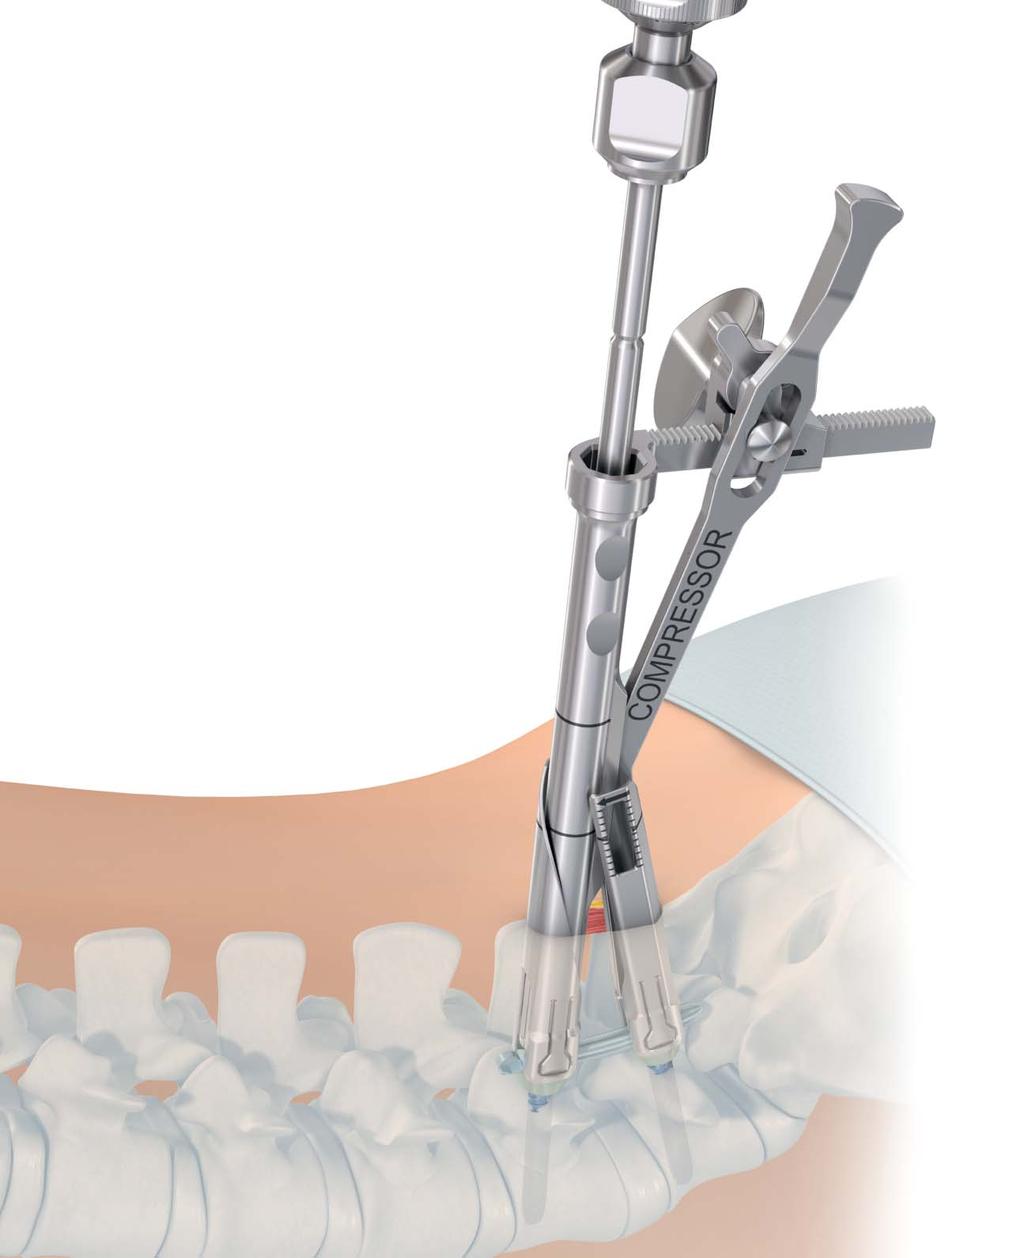 MATRIX Spine System MIS Instrumentation. A minimally invasive instrument system for use with the MATRIX Spine System.